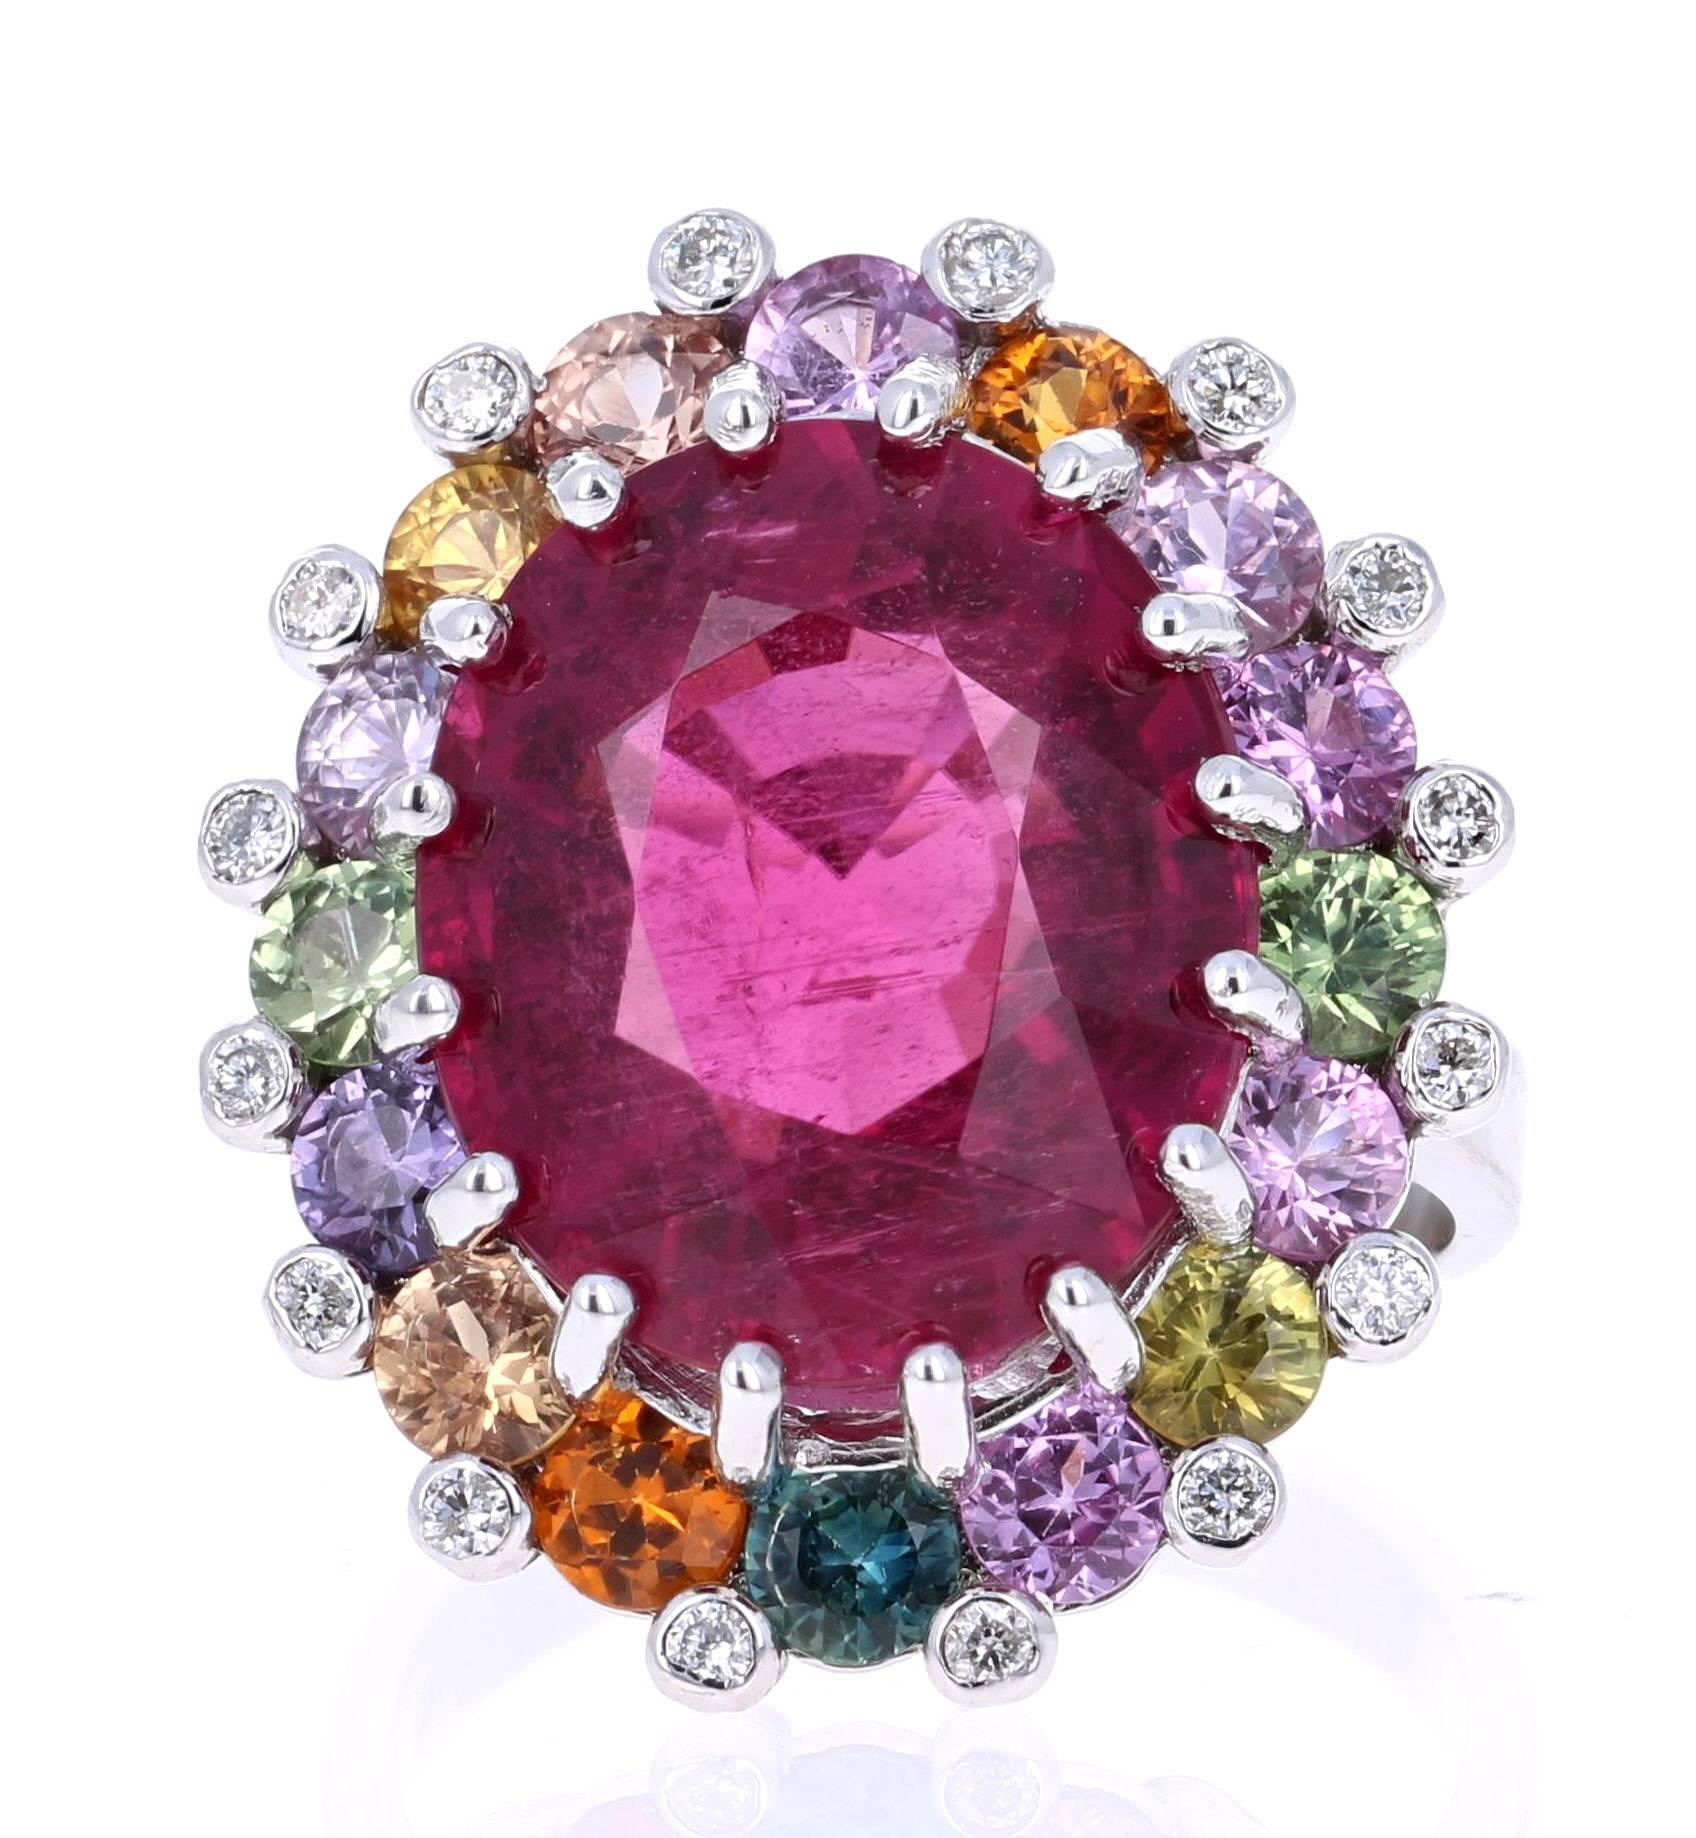 Super gorgeous and uniquely designed 14.73 Carat Pink Tourmaline and Multi-Colored Sapphire Diamond 18K White Gold Cocktail Ring!

This ring has a 11.47 carat Oval Cut Pink Tourmaline that is set in the center of the ring and is surrounded by 16